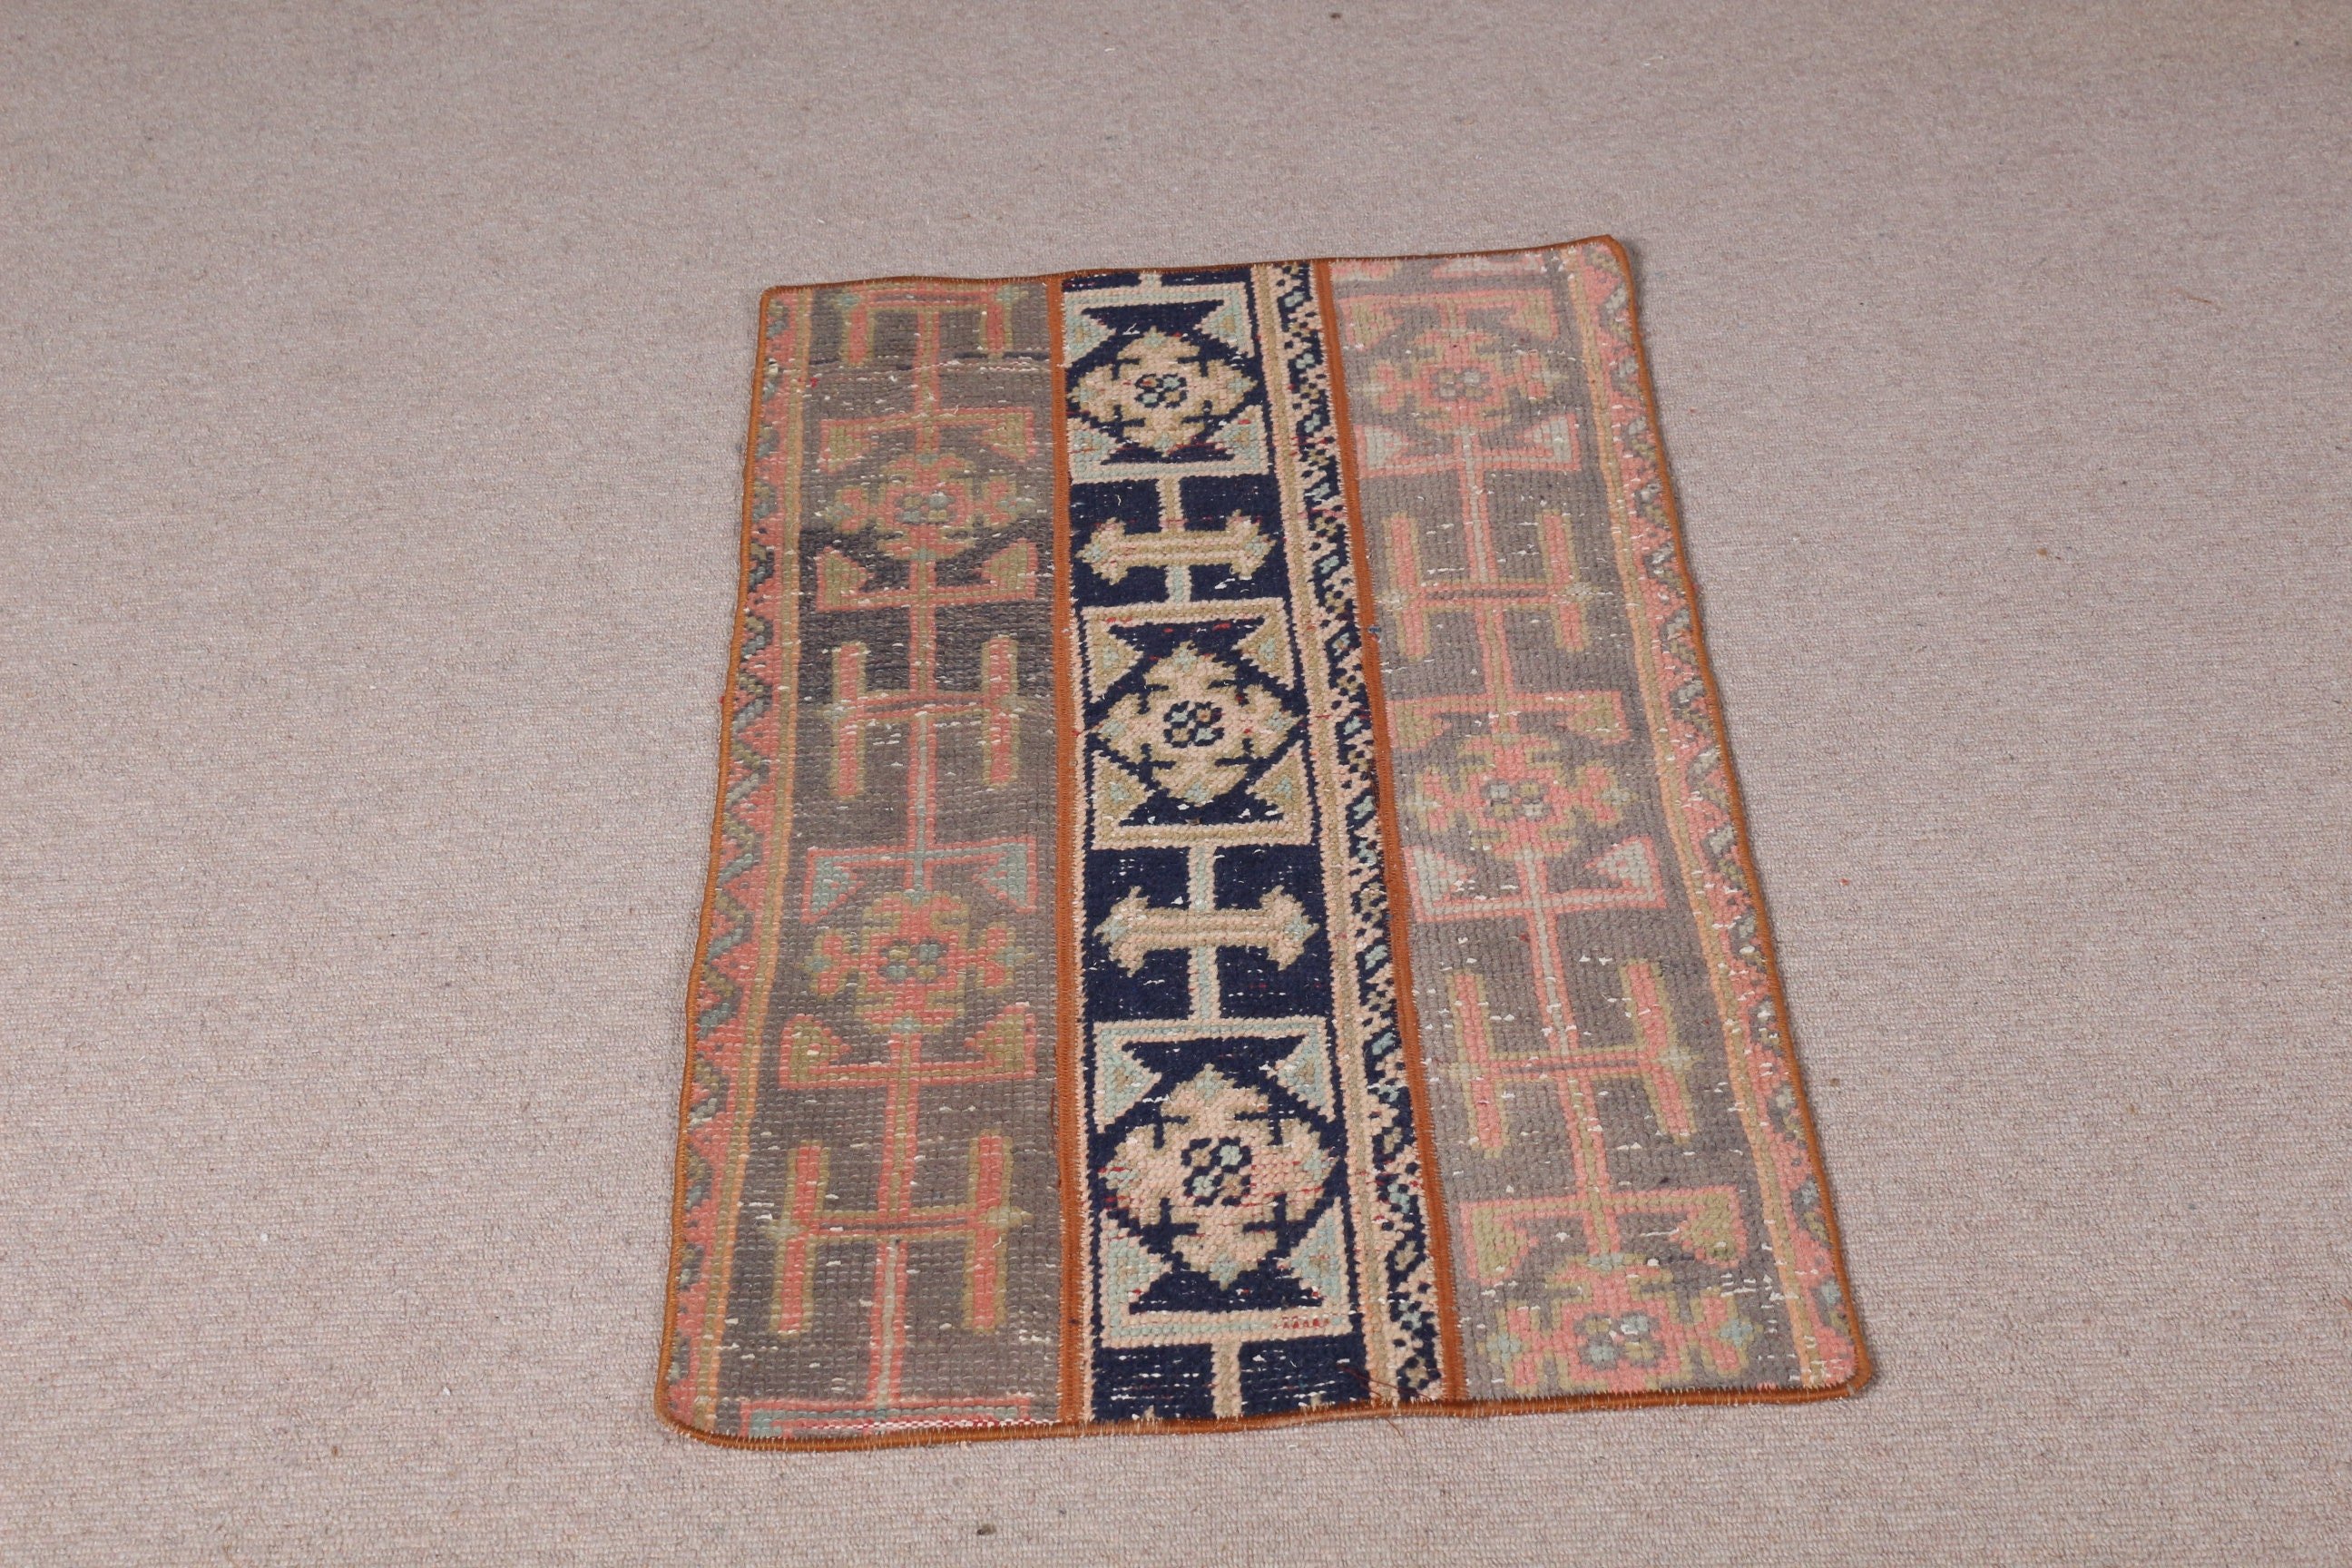 Bath Rug, Rugs for Car Mat, Oushak Rug, Vintage Rug, Anatolian Rugs, Blue Bedroom Rug, 1.9x3.3 ft Small Rugs, Kitchen Rug, Turkish Rugs